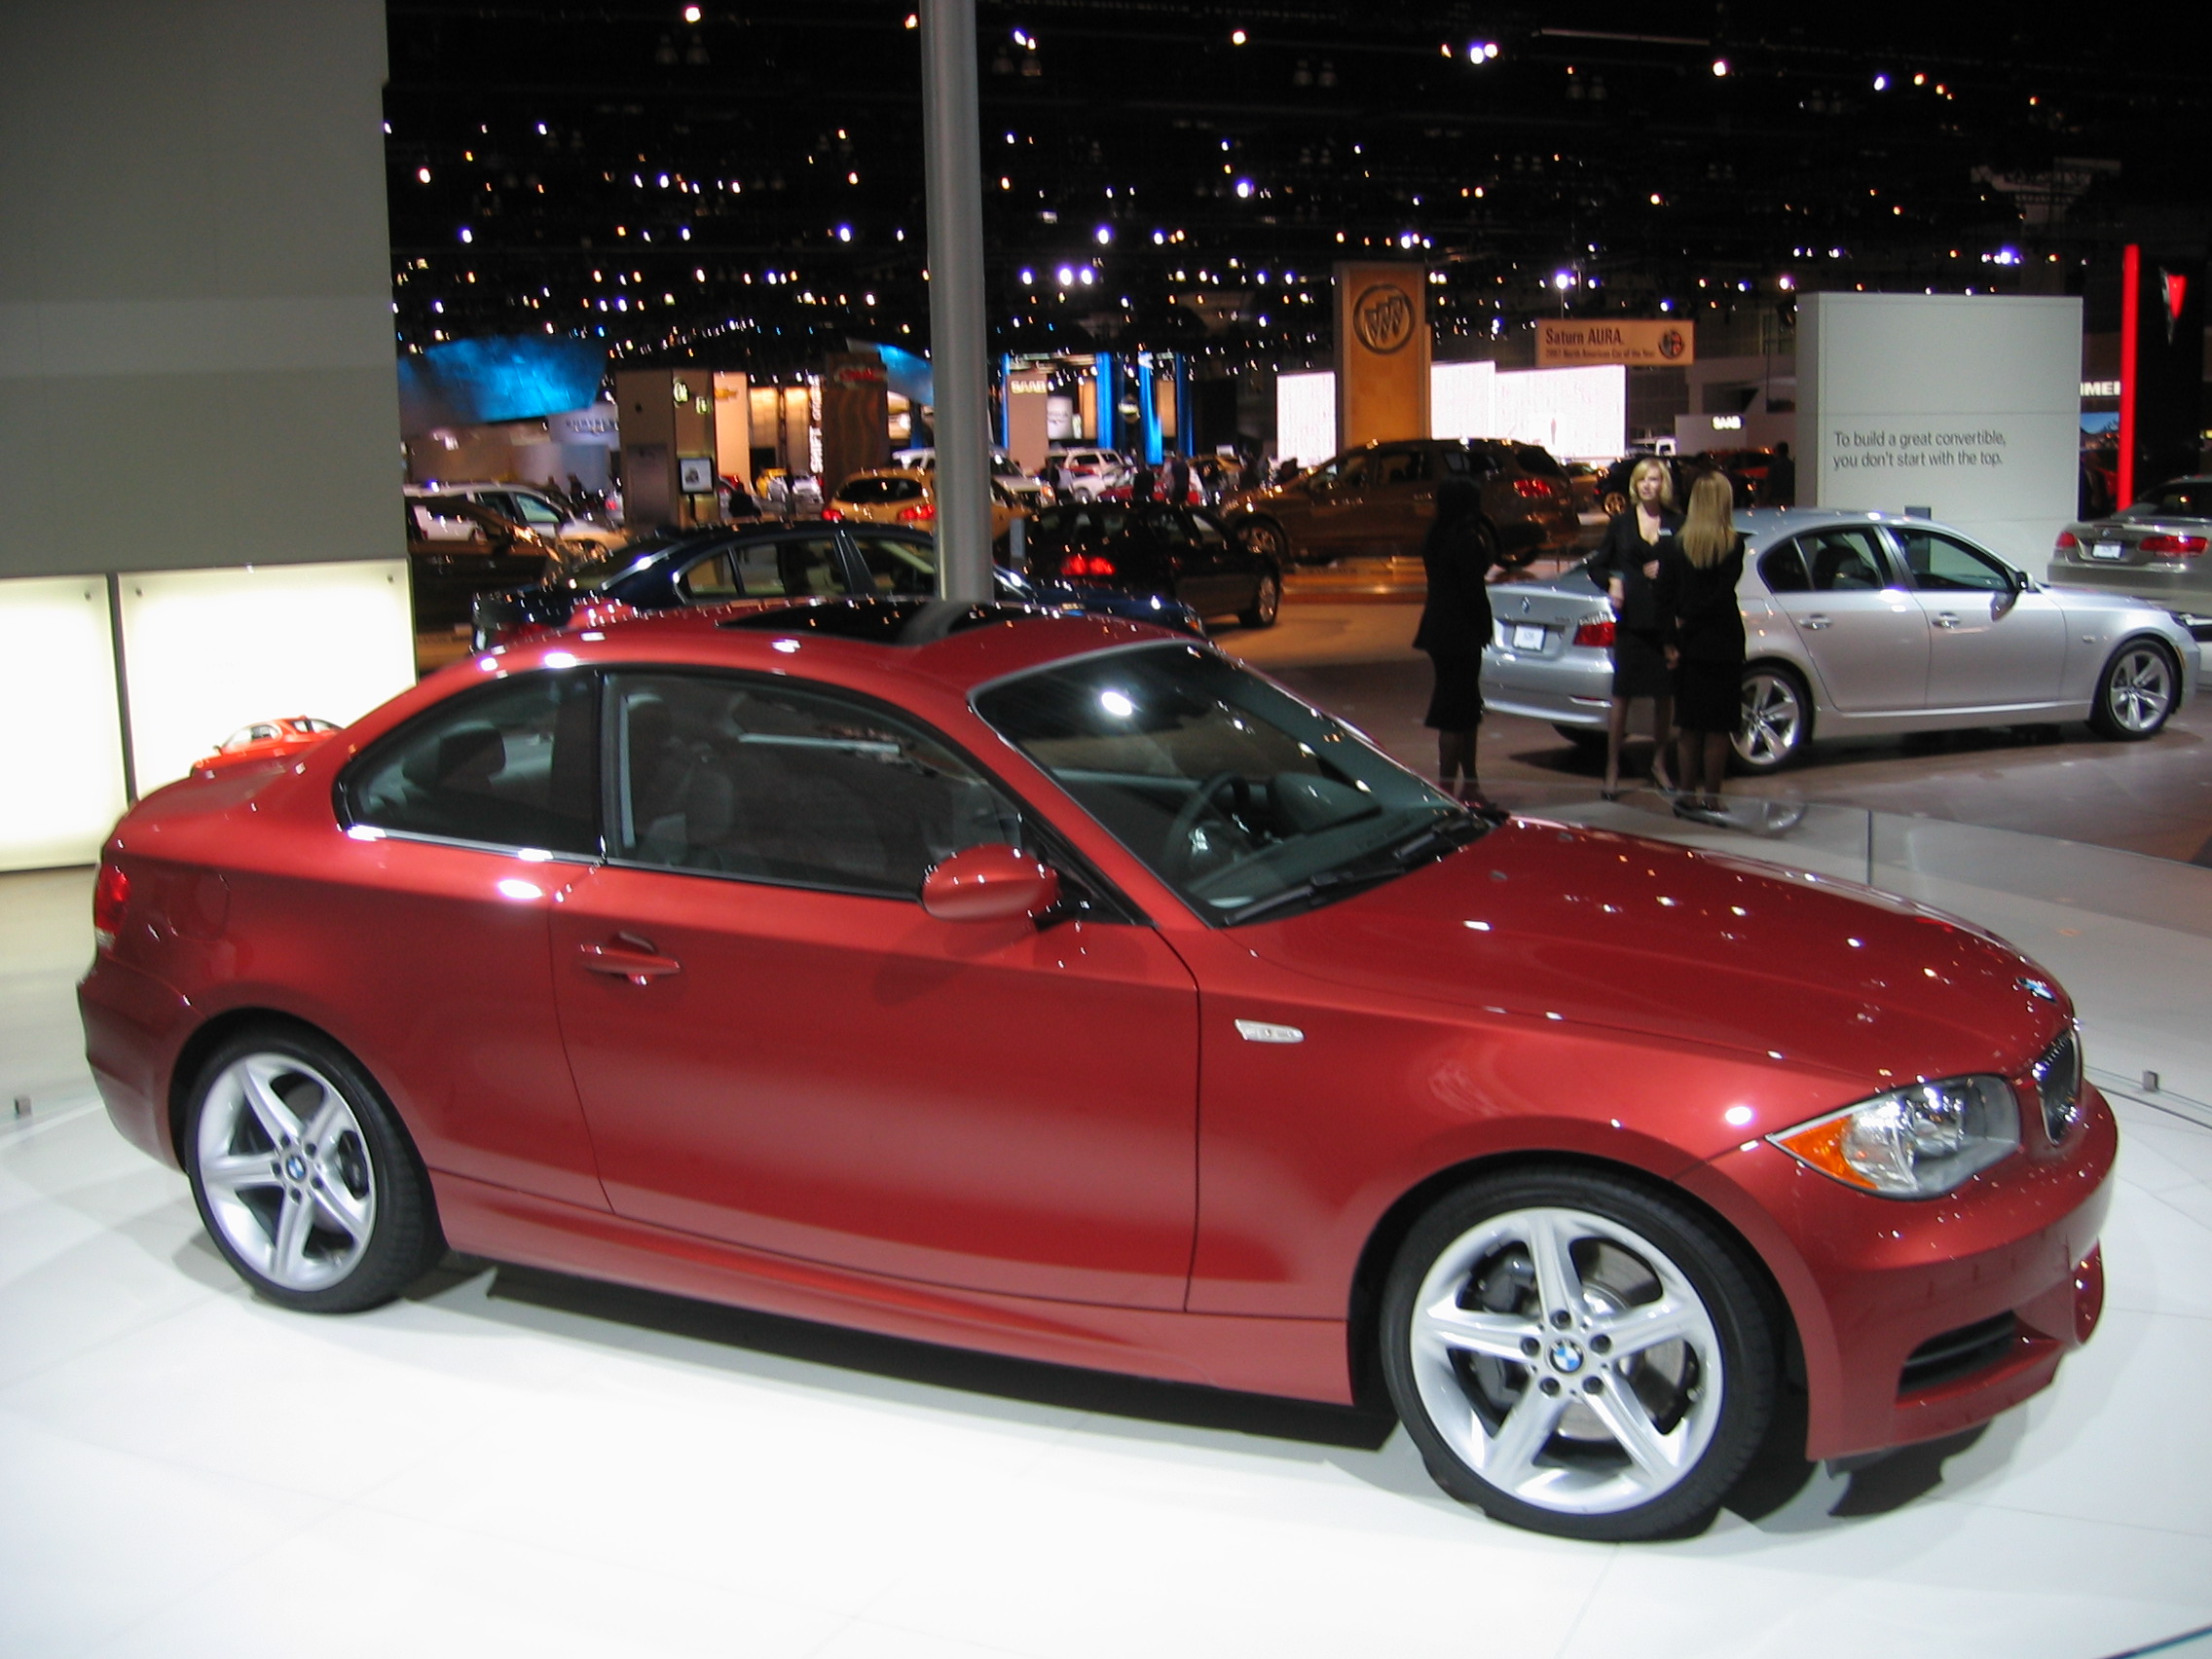 bmw-1-series.jpg. We have been covering the 1 Series since July and were